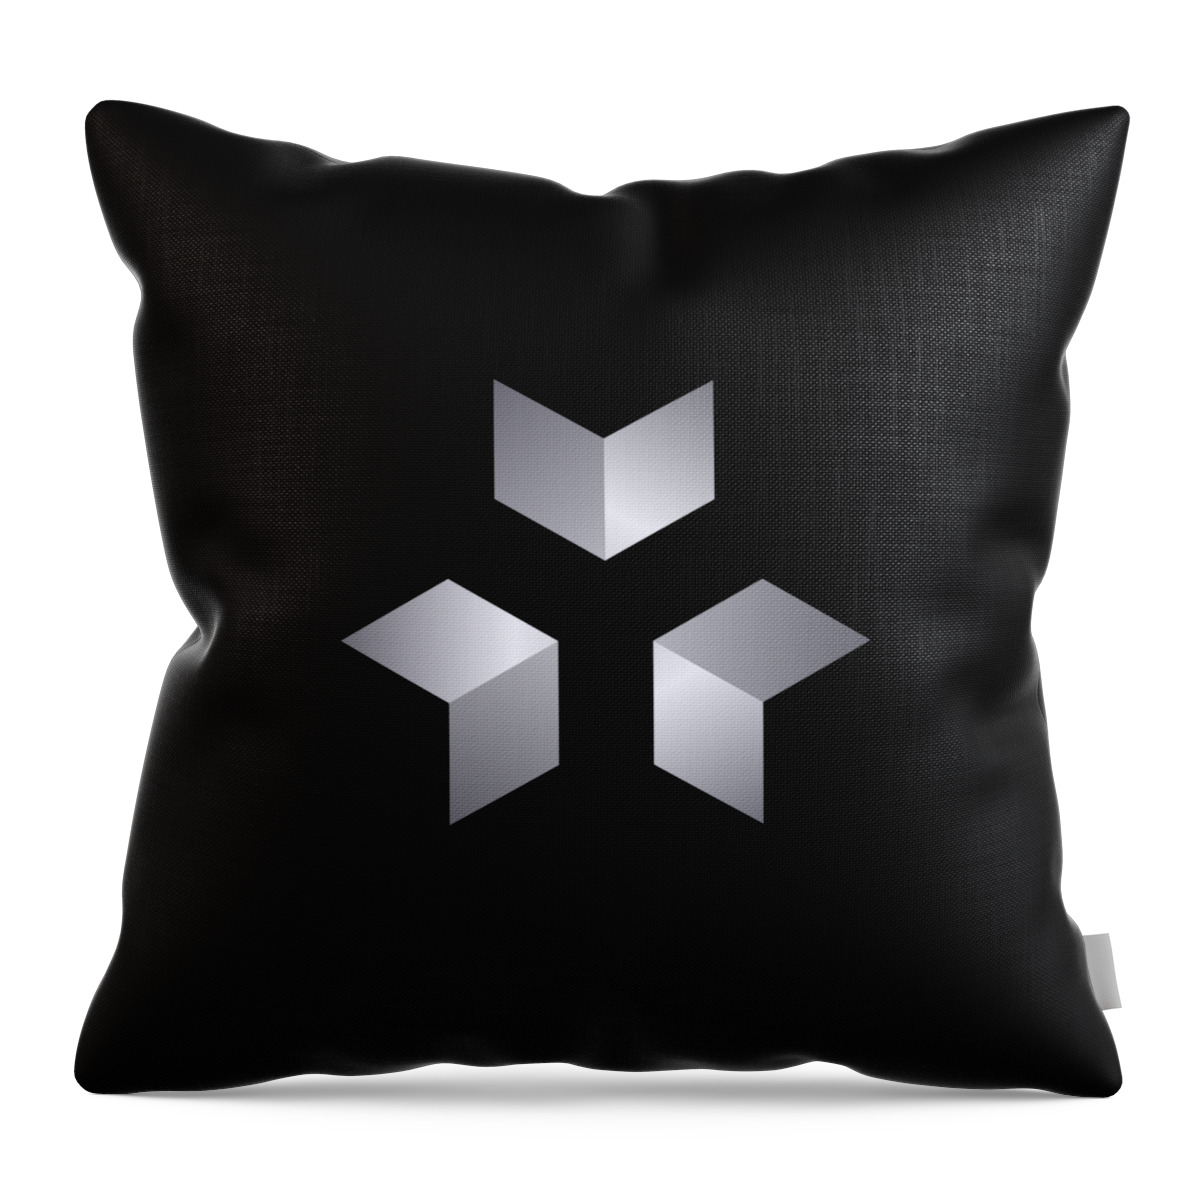 Pattern Throw Pillow featuring the digital art 3 Cubes by Pelo Blanco Photo